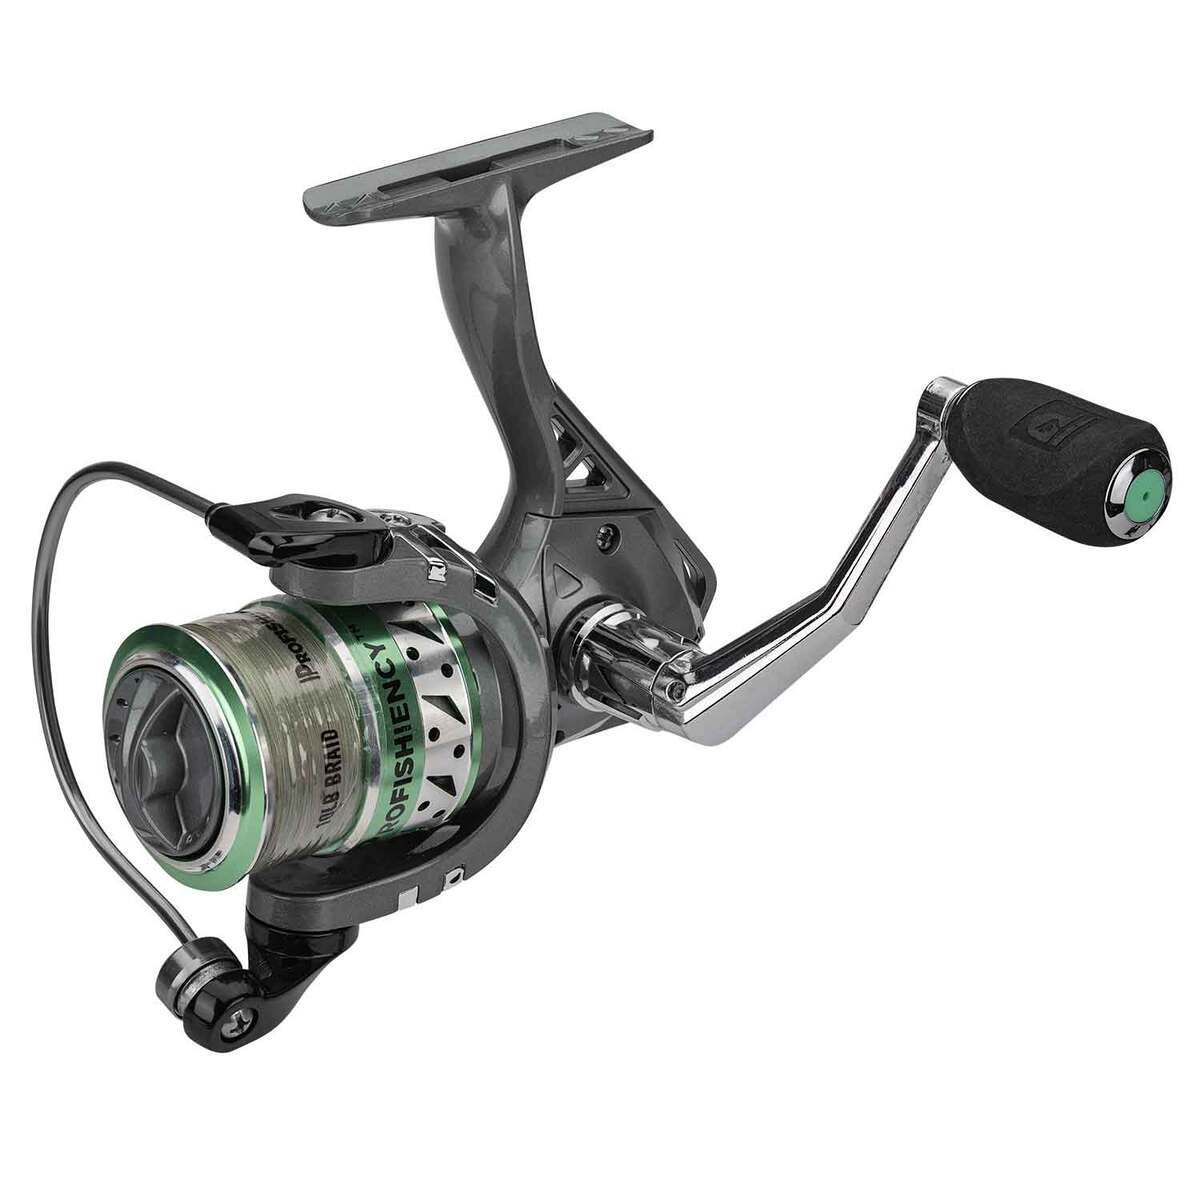 Favorite Fishing USA Fire Spinning Reel - Size 3000 - Red/Black 3000